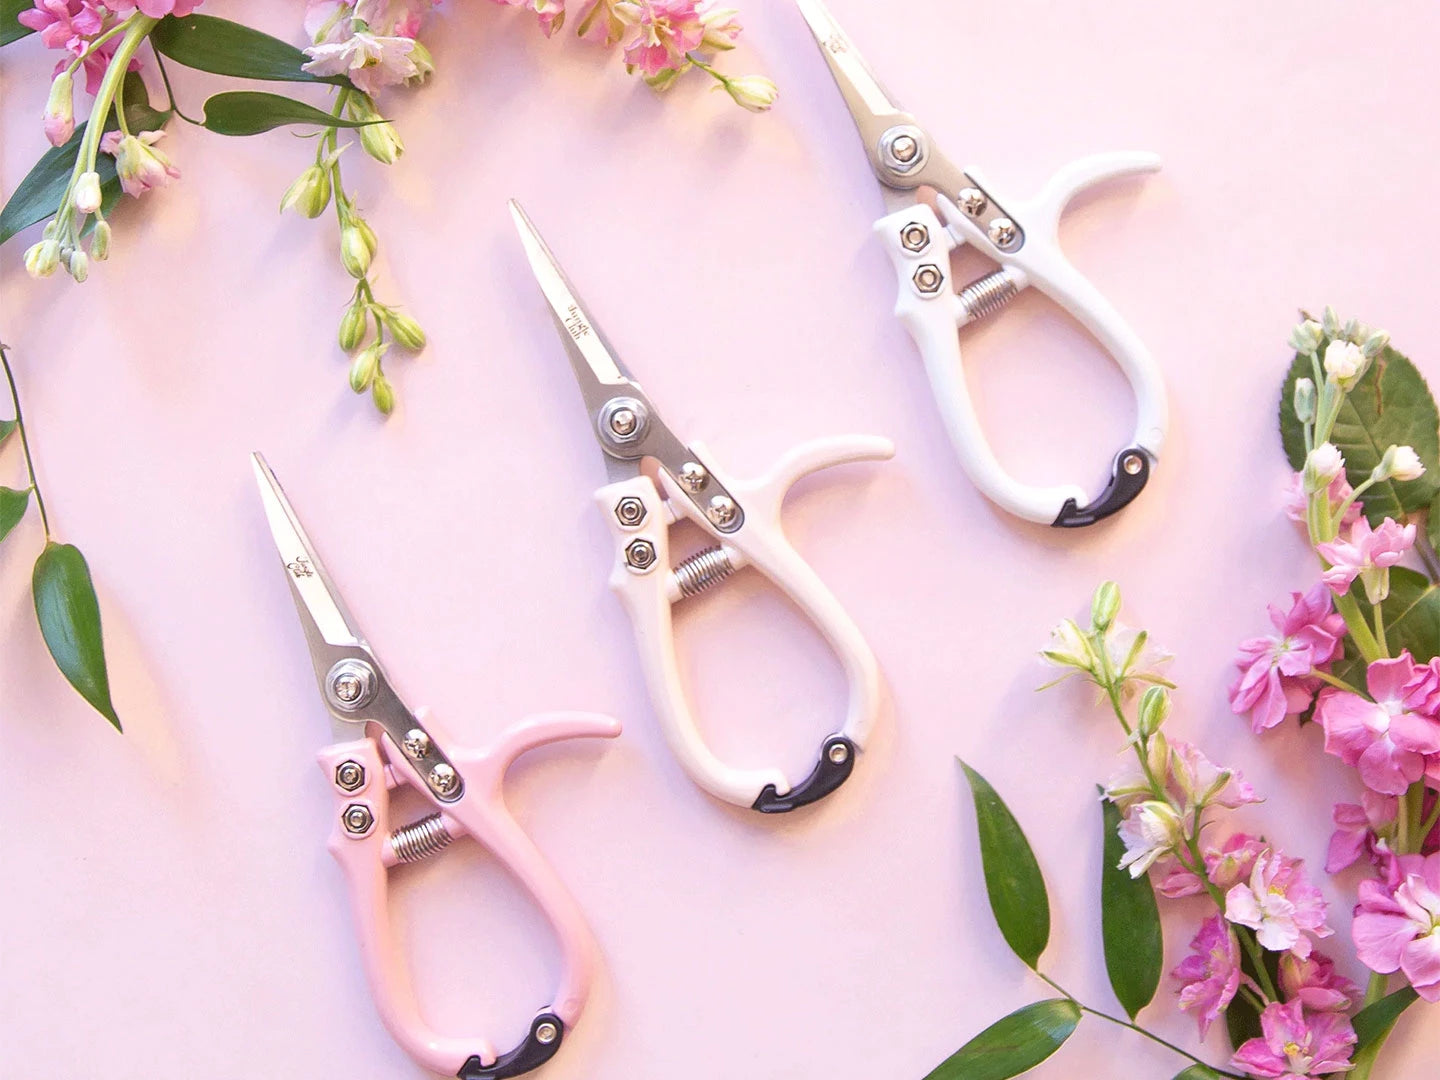 pruning shears in pink, vanilla, and white